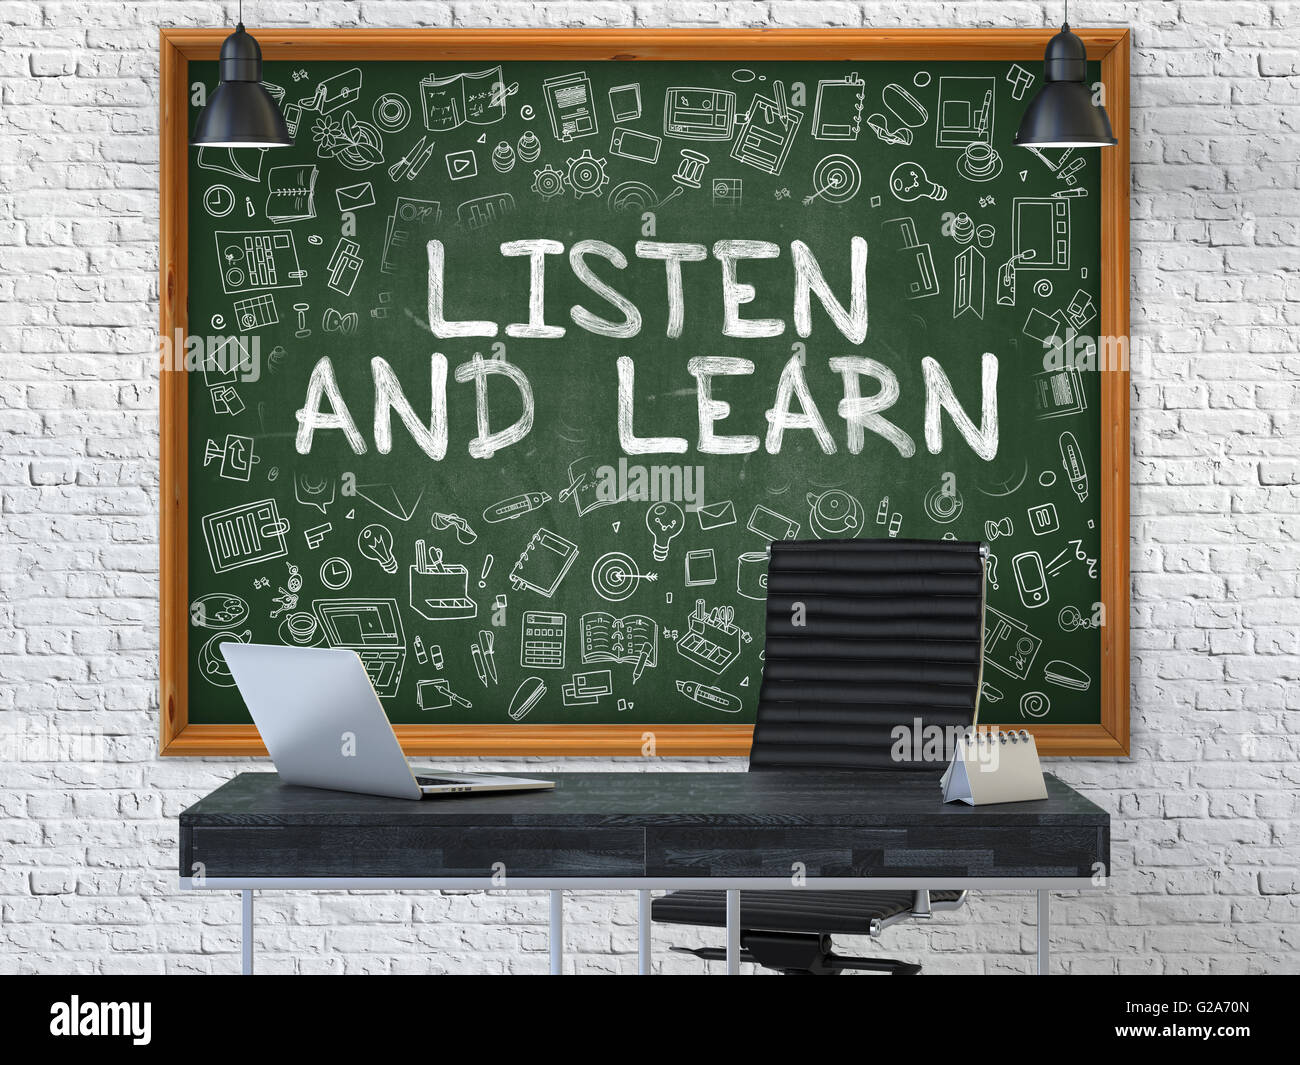 Listen and Learn on Chalkboard with Doodle Icons. Stock Photo